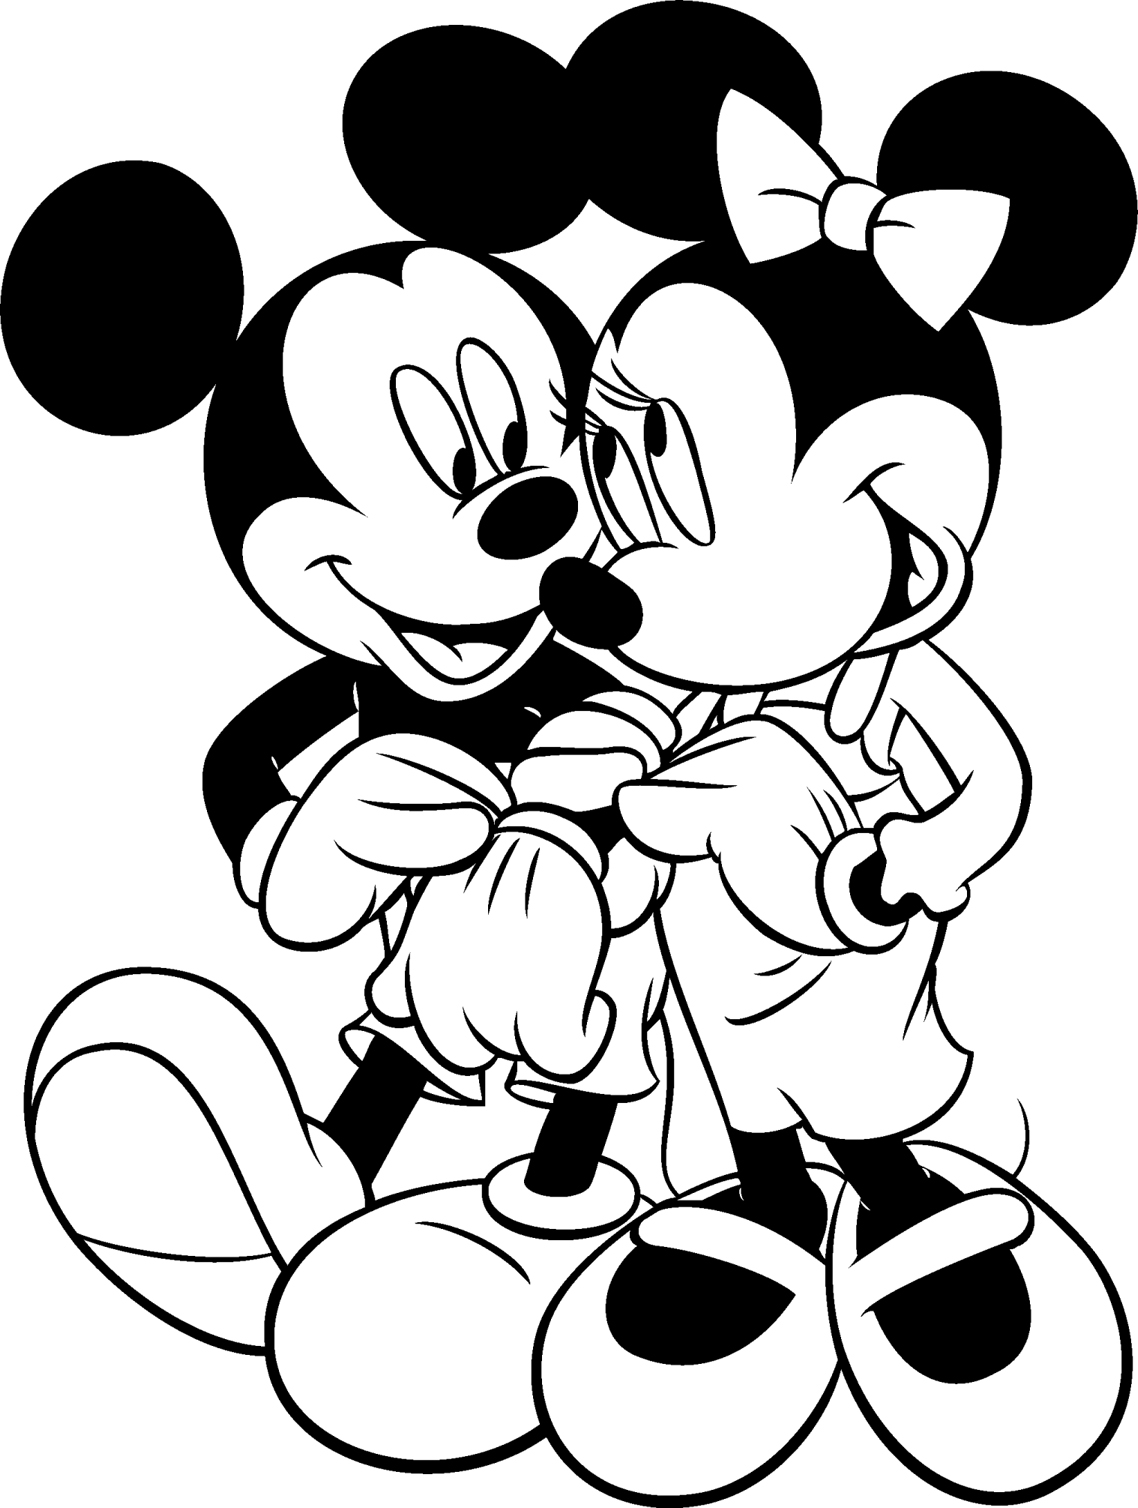 Cartoon Coloring Pages (19) Coloring Kids - Coloring Kids